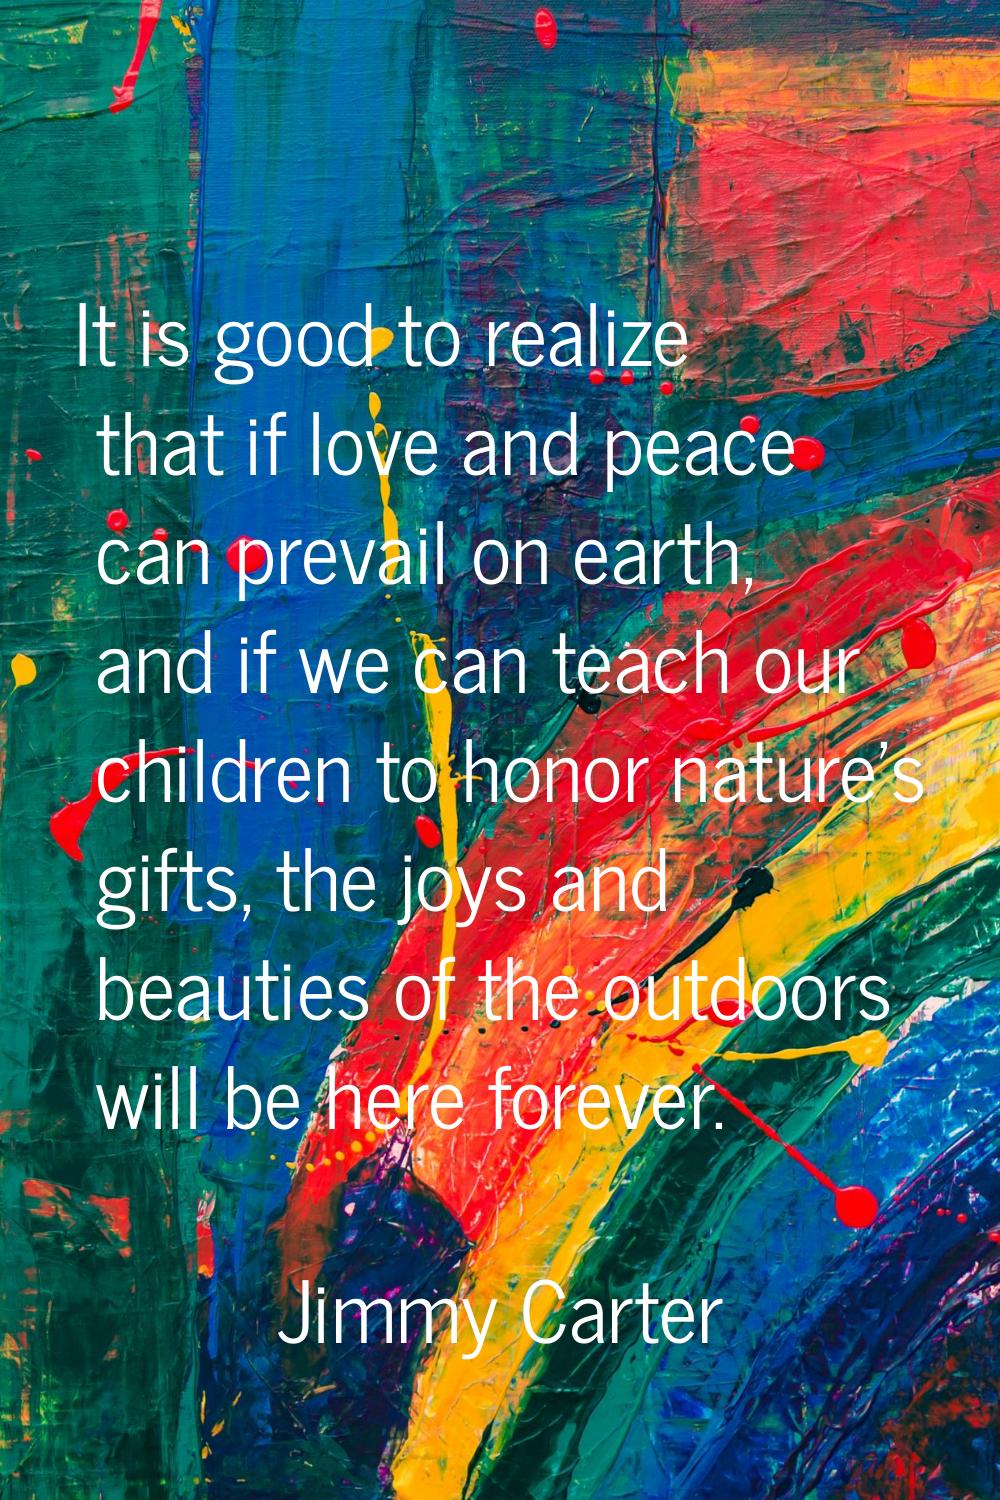 It is good to realize that if love and peace can prevail on earth, and if we can teach our children